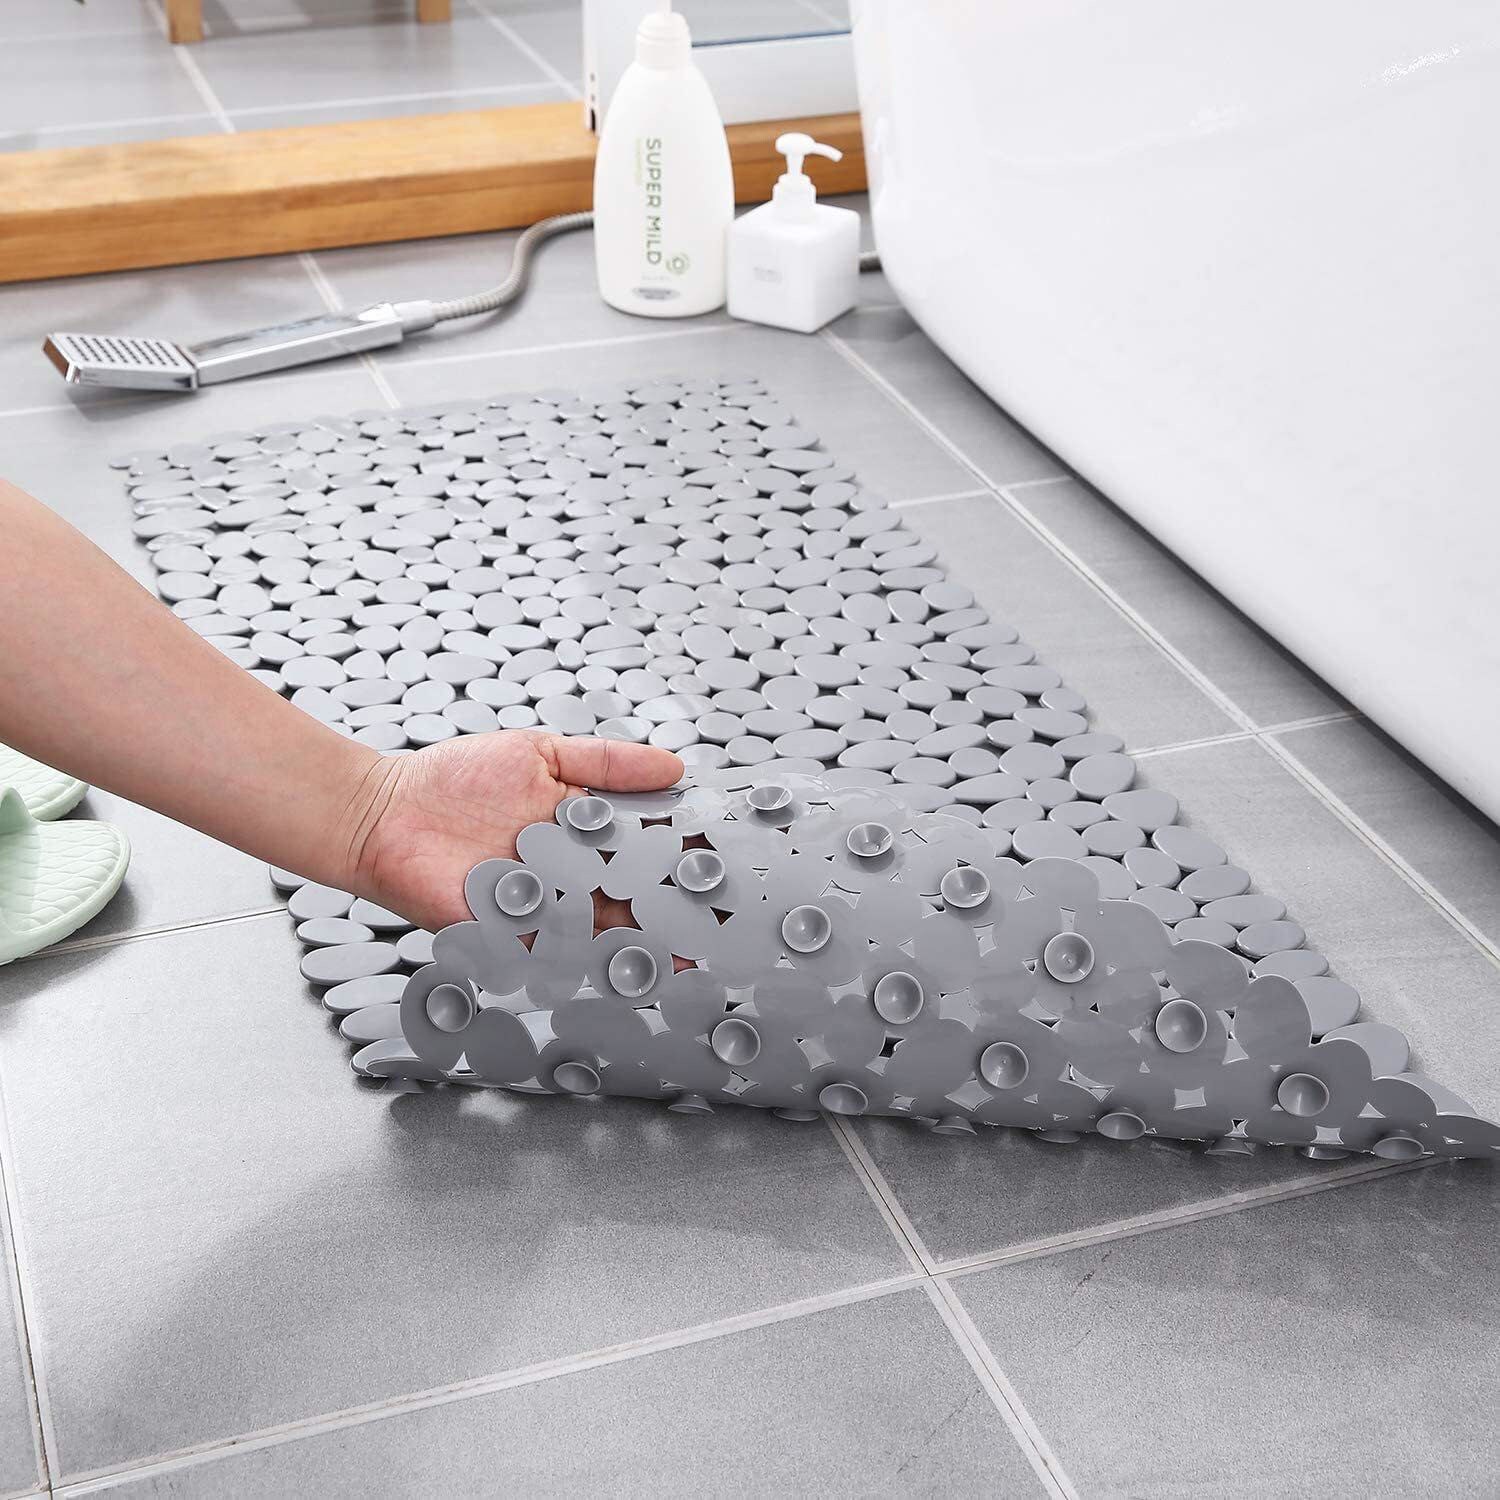 https://assets.dragonmart.ae//pictures/0762438_pebbles-design-bathroom-anti-slip-mat-with-suction-cups-and-drain-holes-grey.jpeg